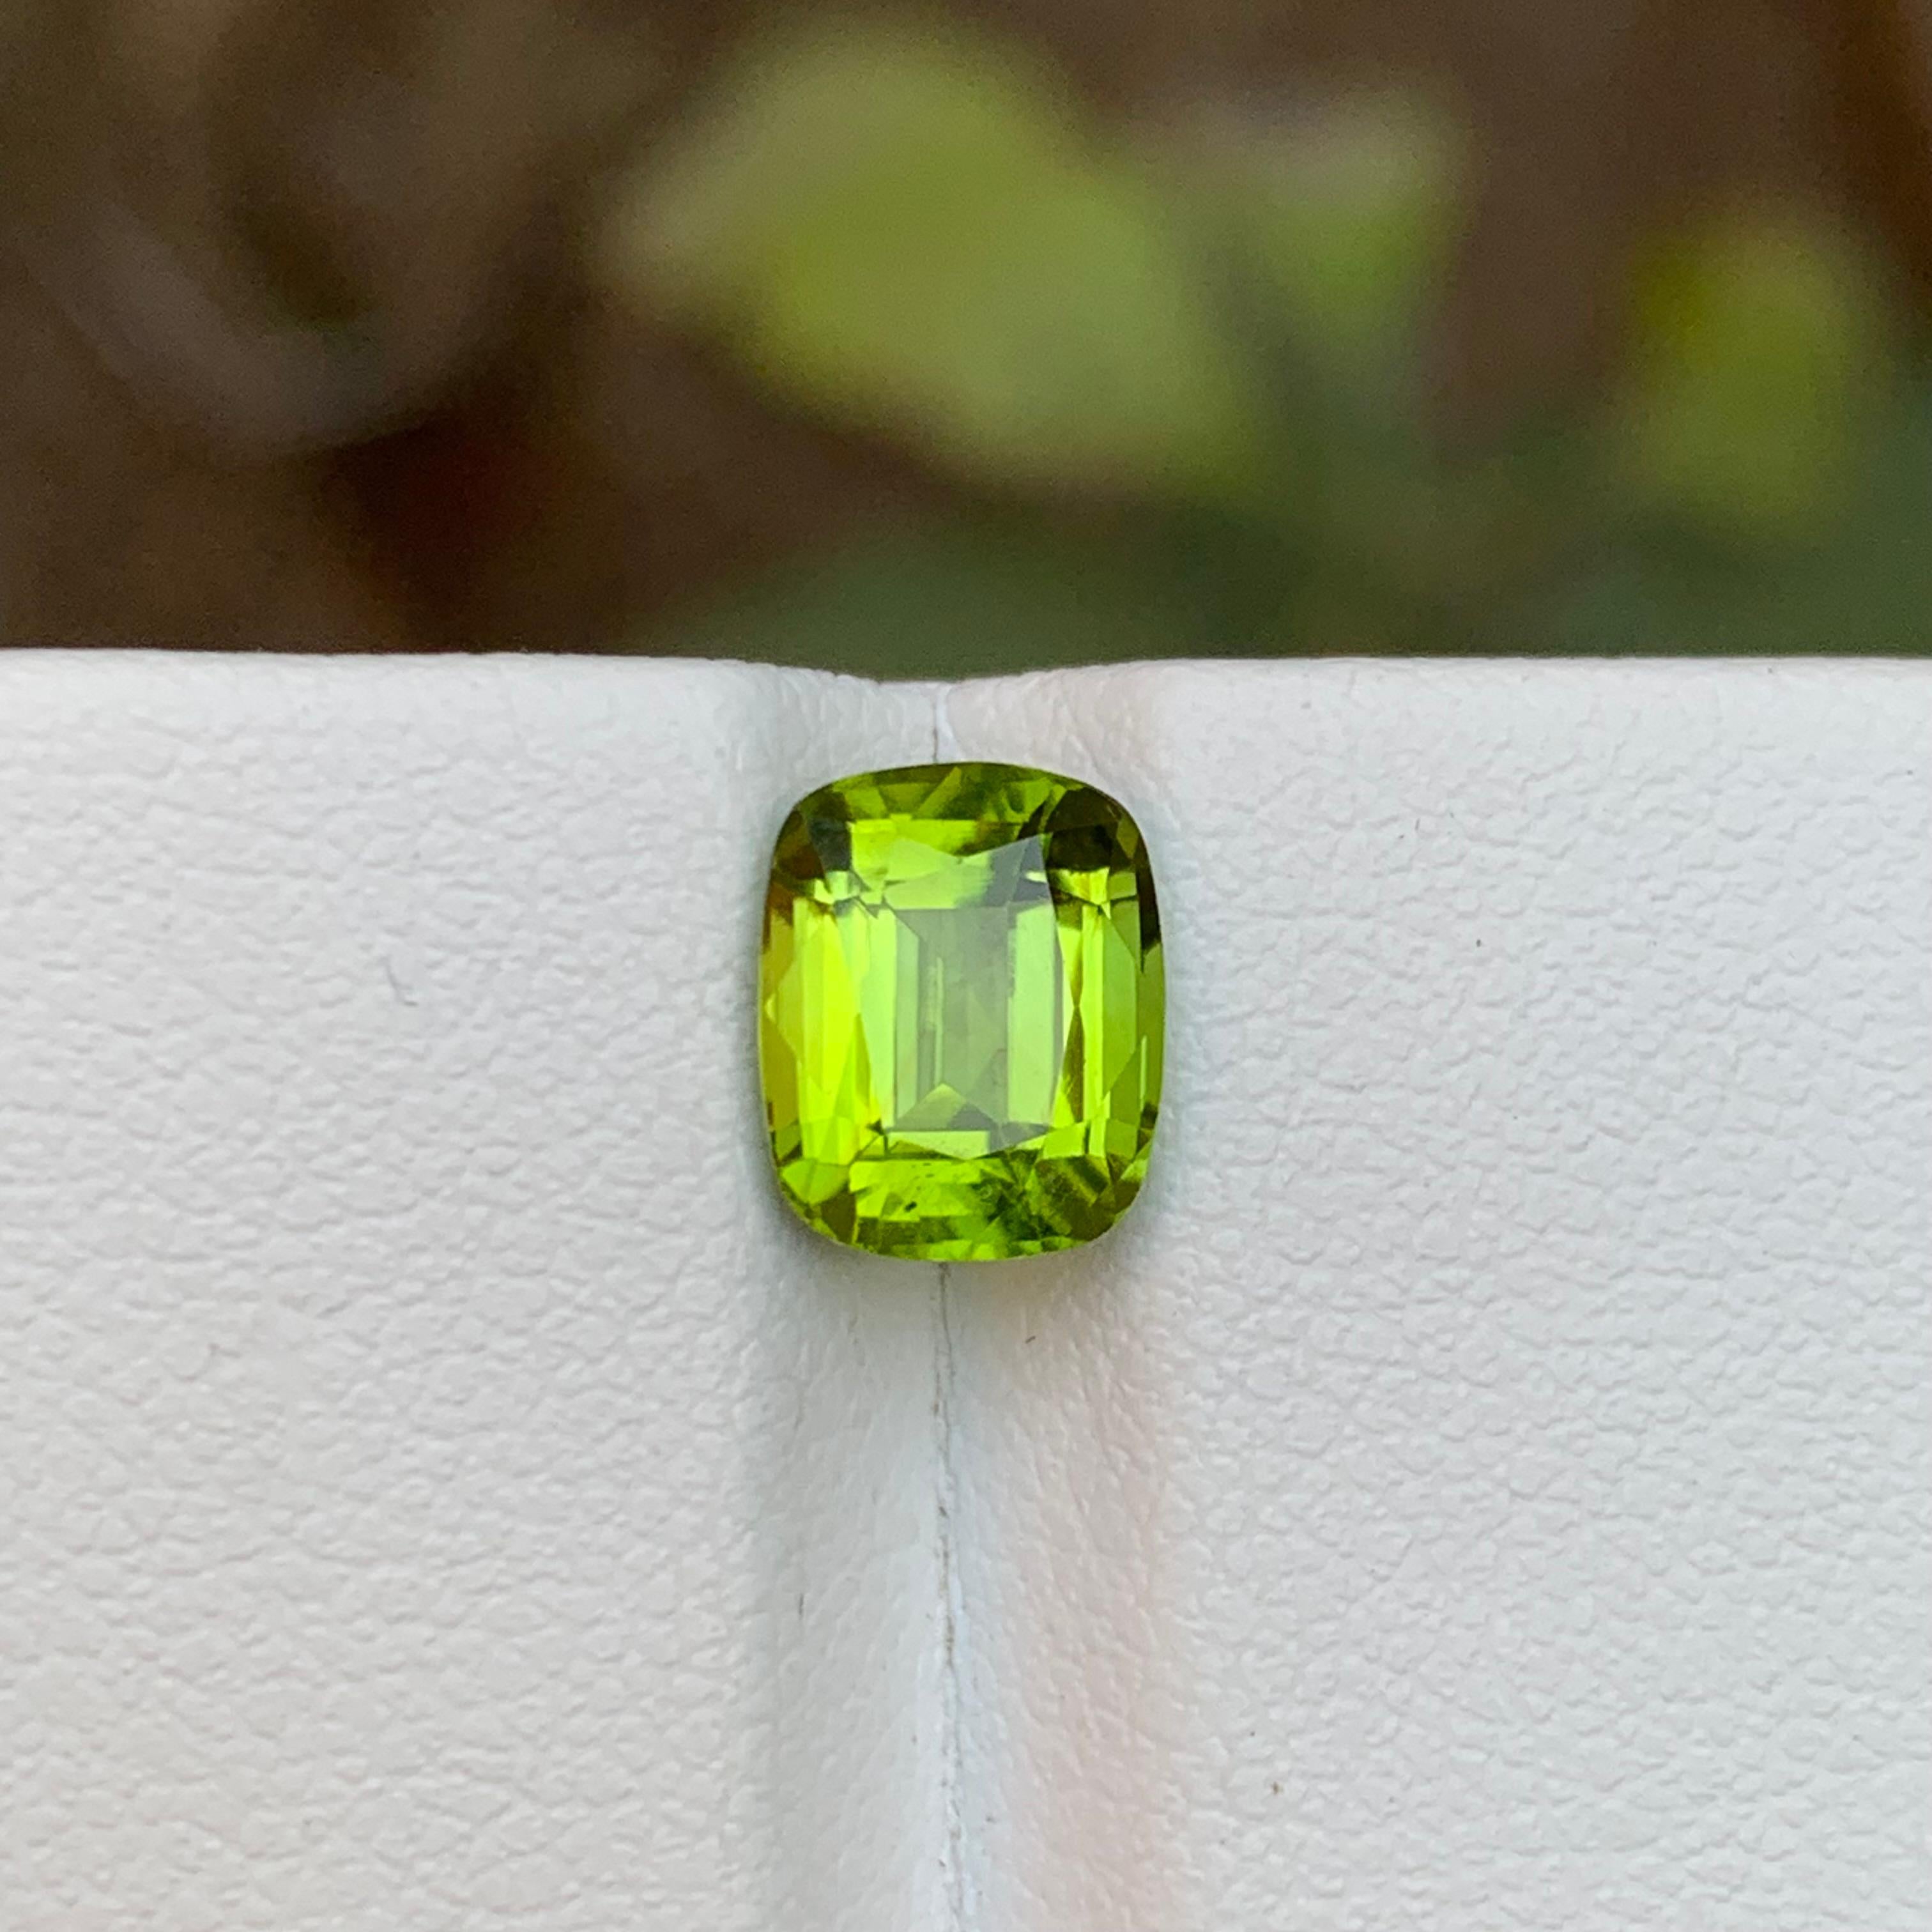 Rare Green Natural Peridot Loose Gemstone, 2.30 Ct Cushion Cut Ideal for Ring For Sale 7